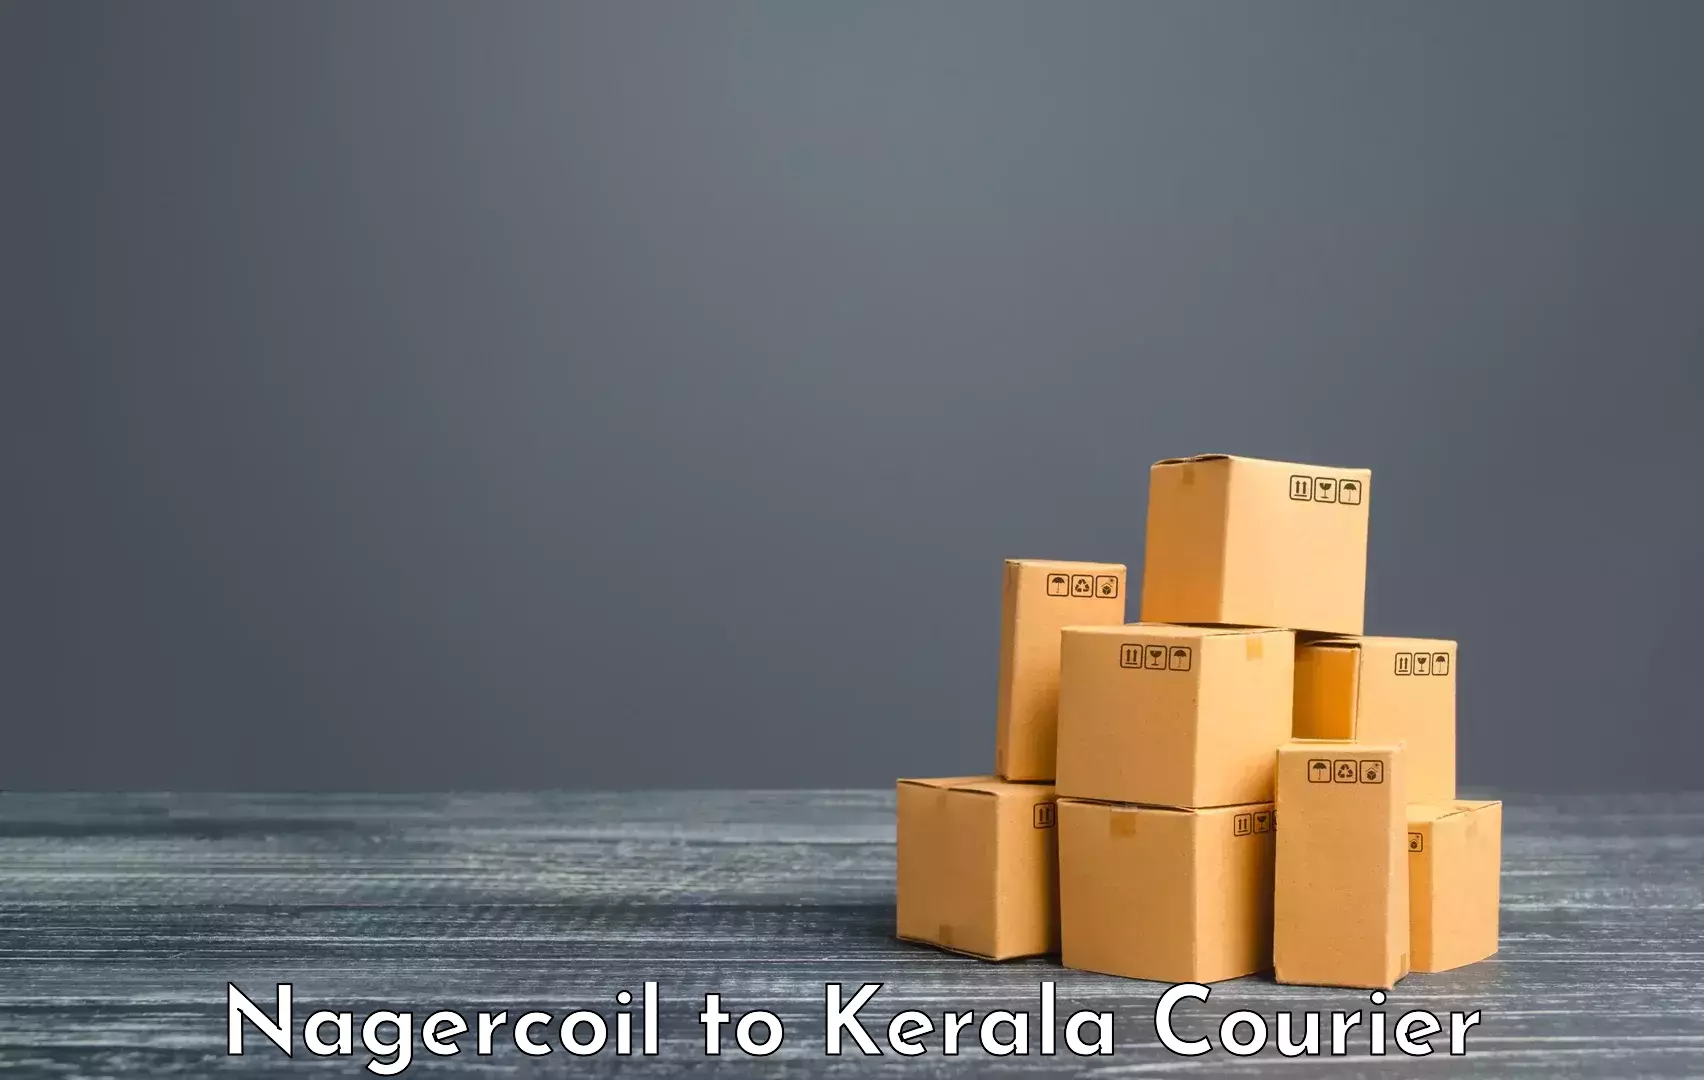 Luggage transfer service Nagercoil to Kochi